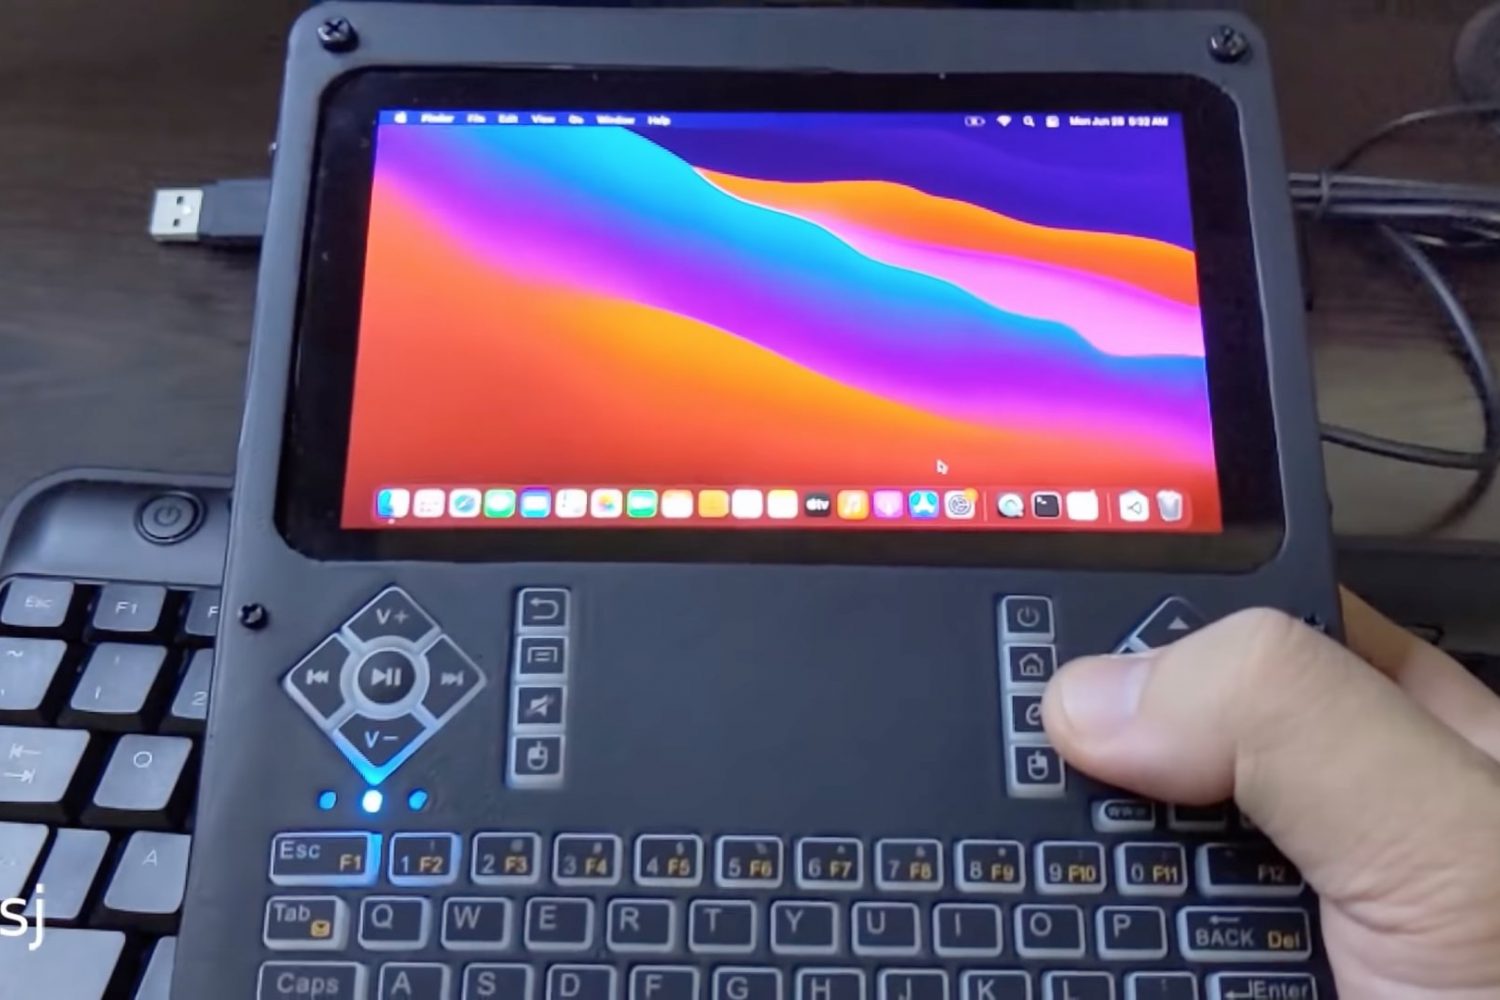 A still from a YouTube video showing a DIY handheld computer running Apple's macOS Big Sur software